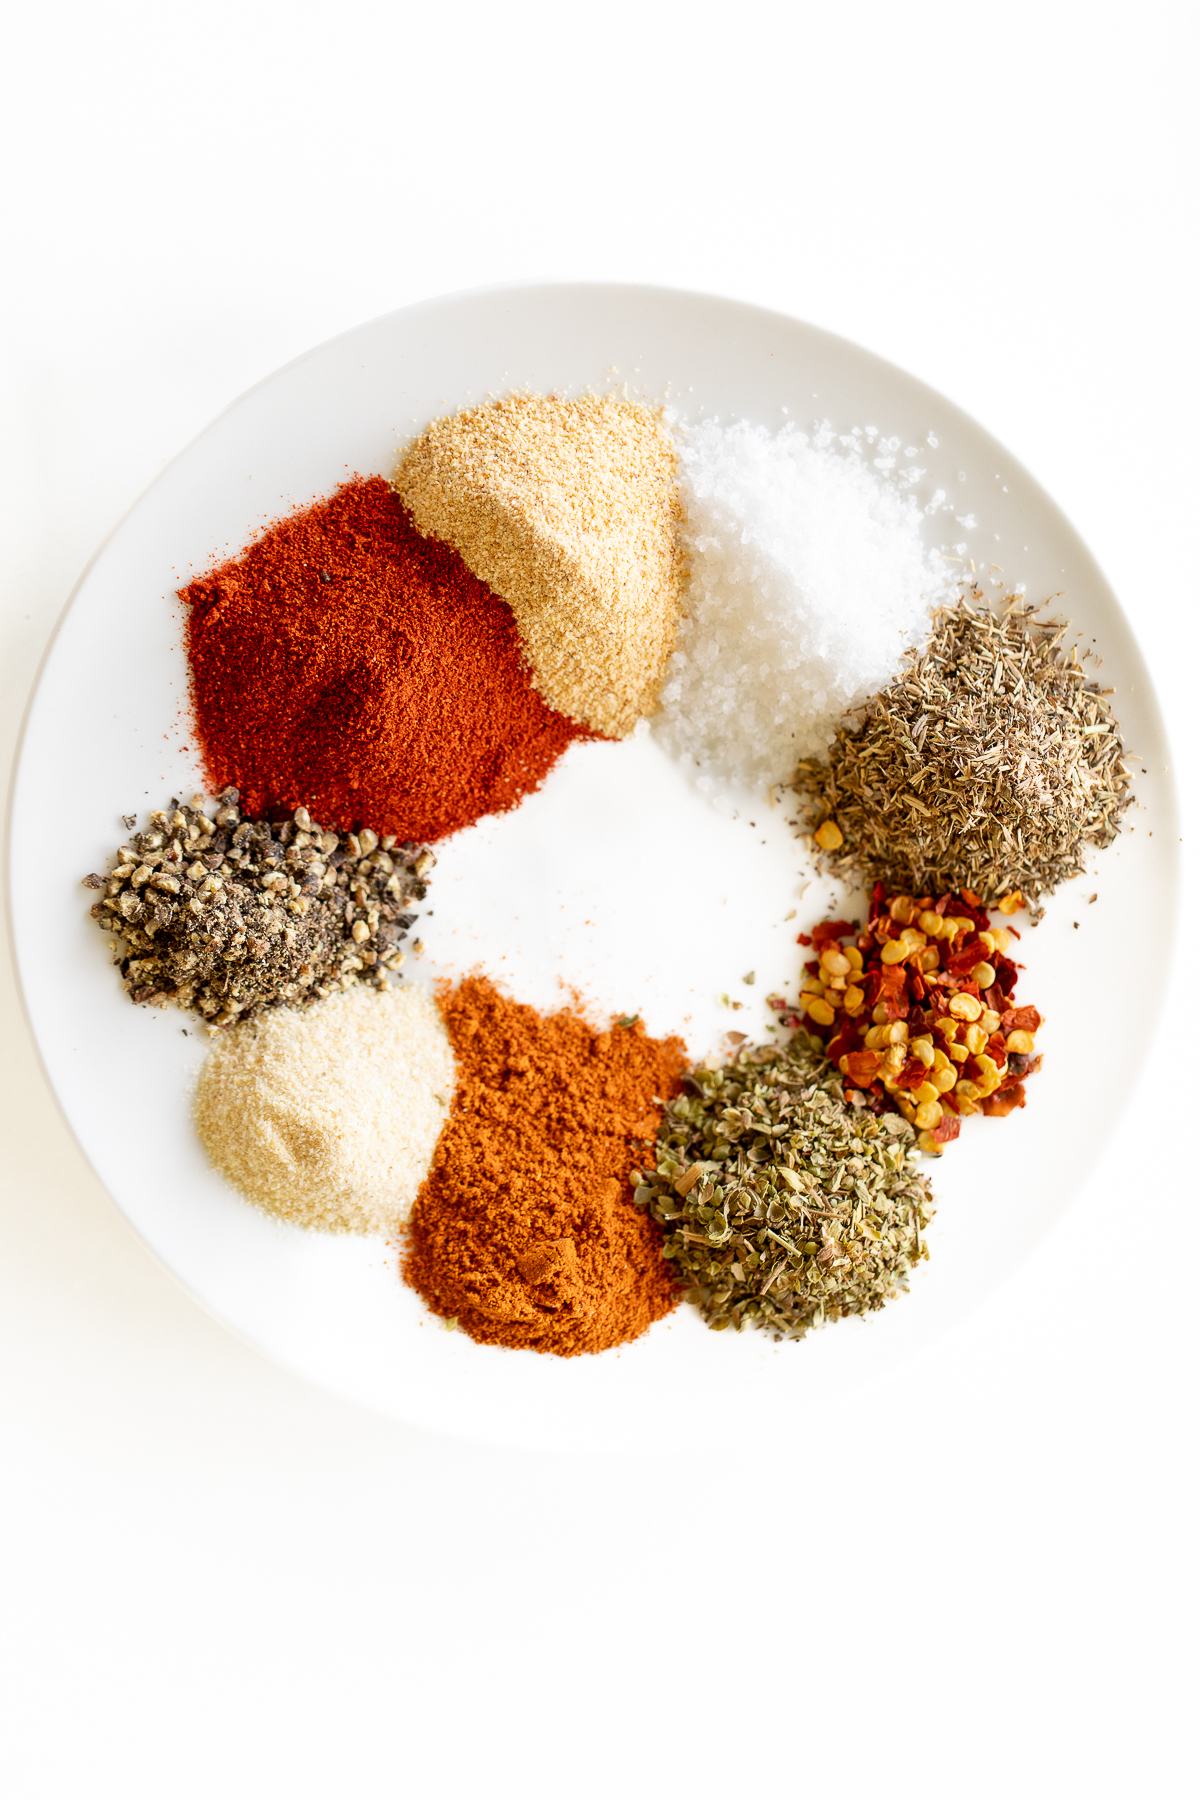 Various spices on a white plate for a homemade cajun seasoning recipe.